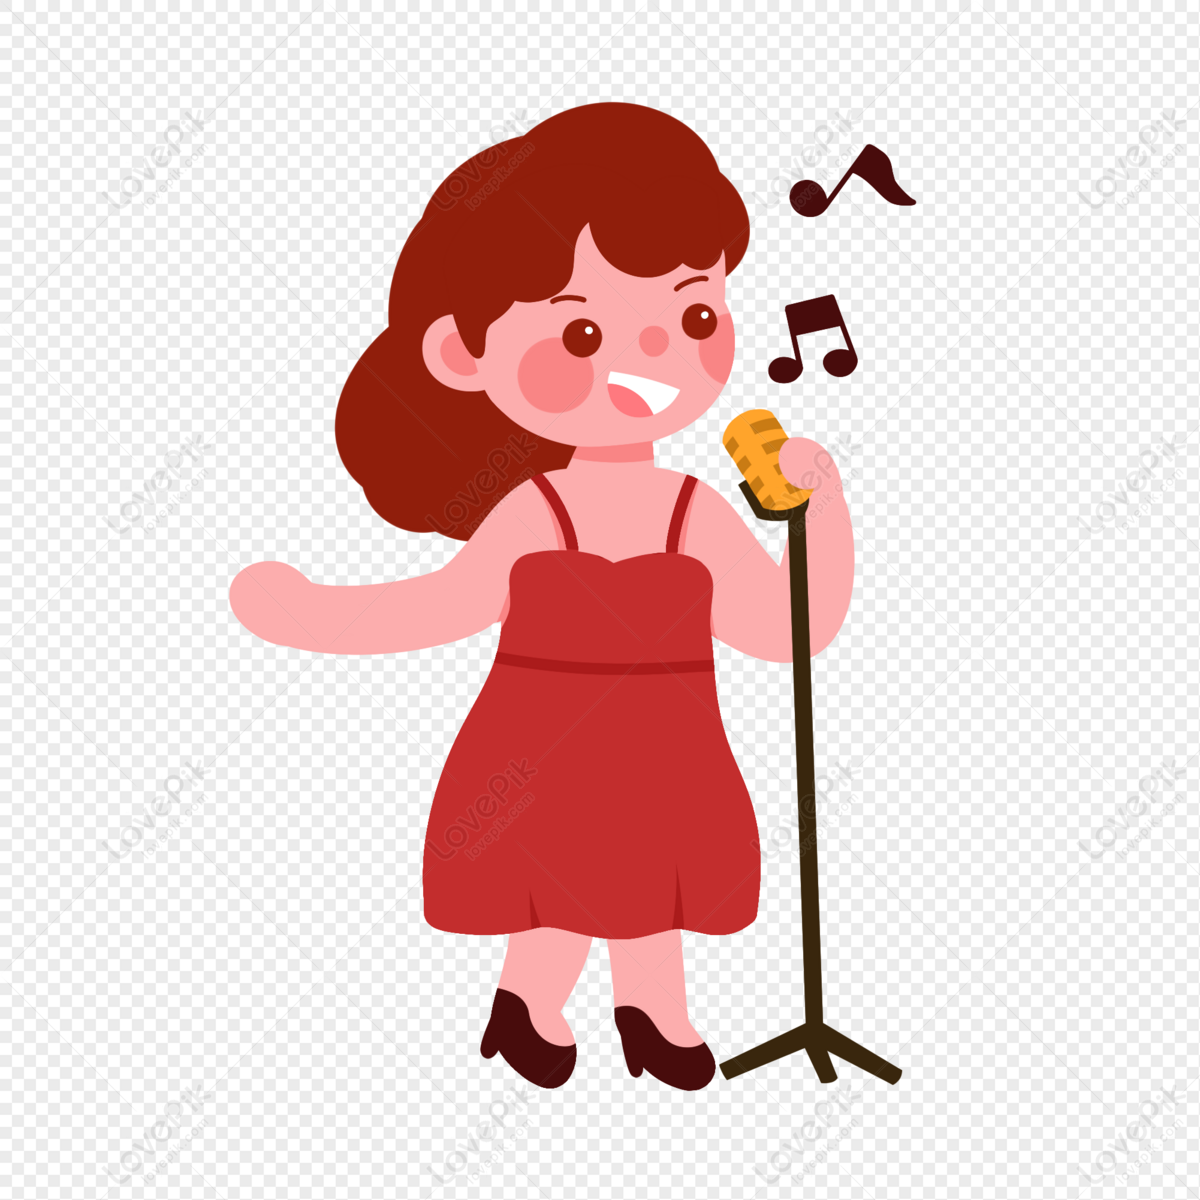 Singing Girl PNG Transparent Background And Clipart Image For Free Download  - Lovepik | 401159230